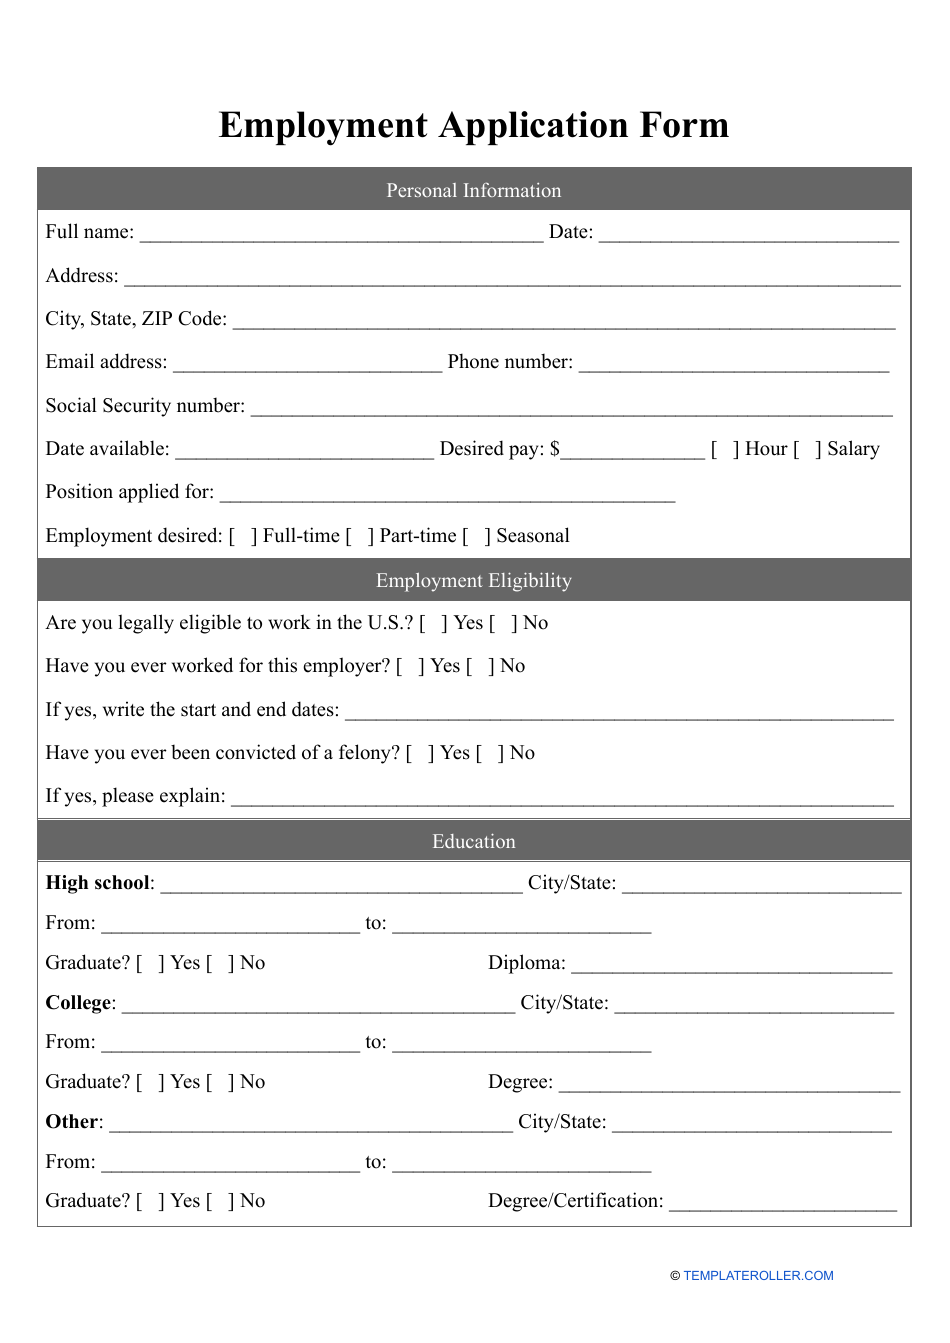 Employment Application Form Fill Out Sign Online And Download Pdf Templateroller 6793